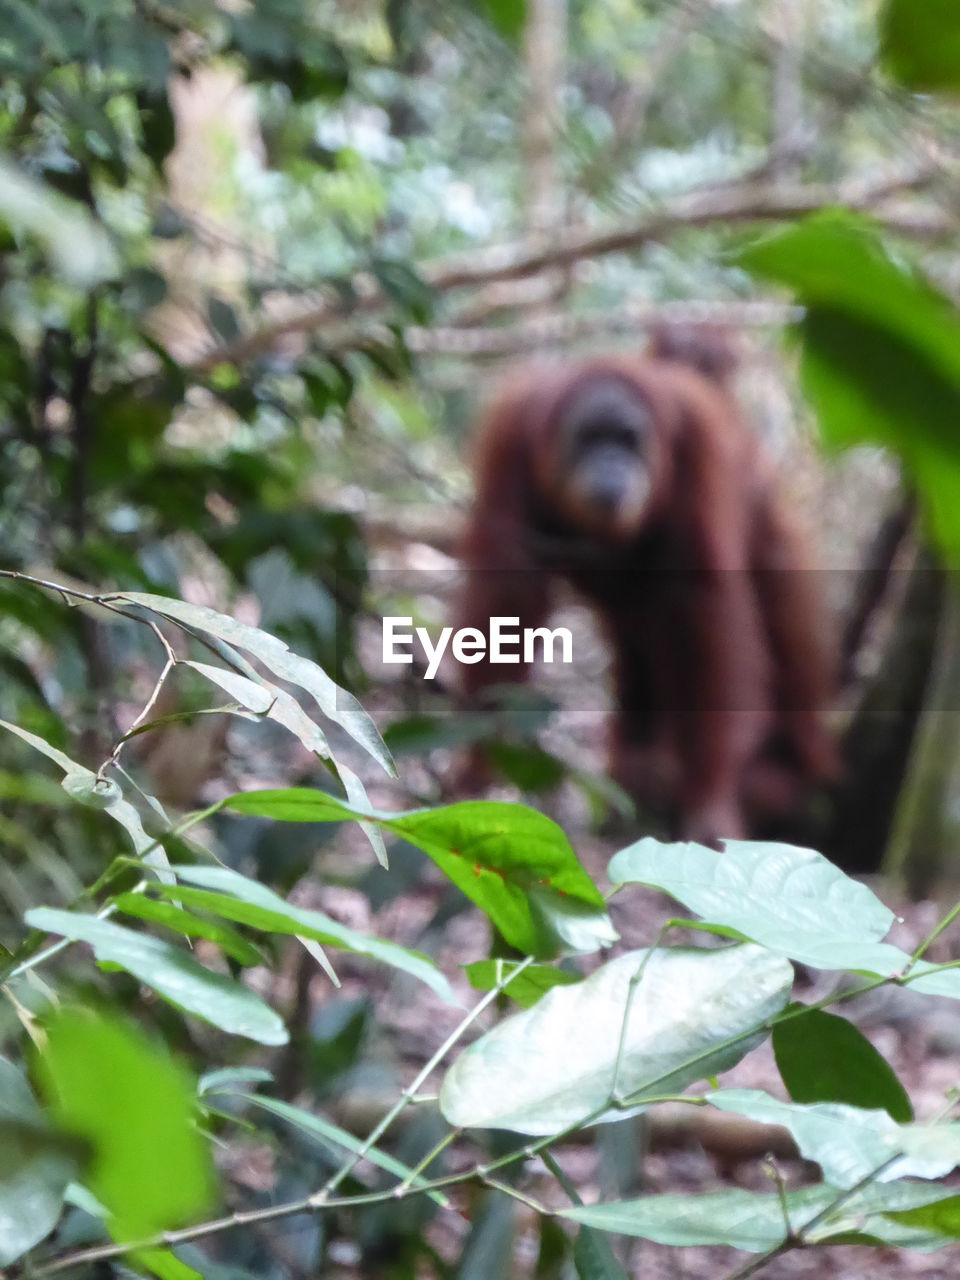 Close-up of plants with orangutan in background